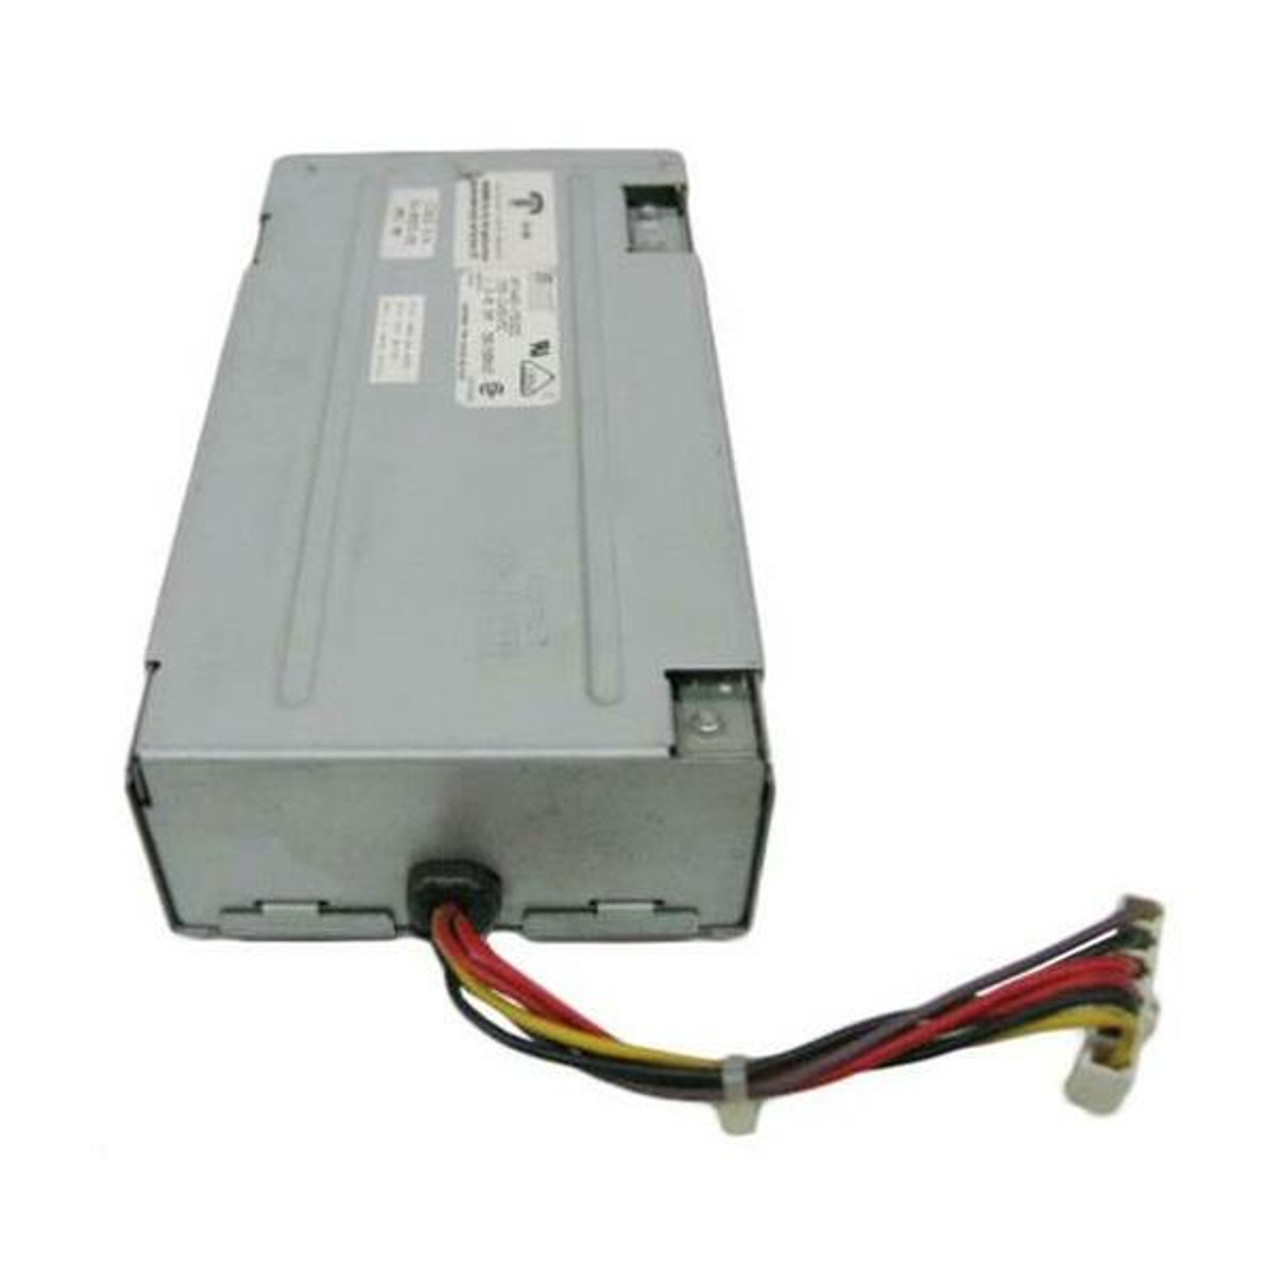 AS54HPX-AC-RPS= Cisco Dual AC Power Supply for AS5400HPX (Refurbished)